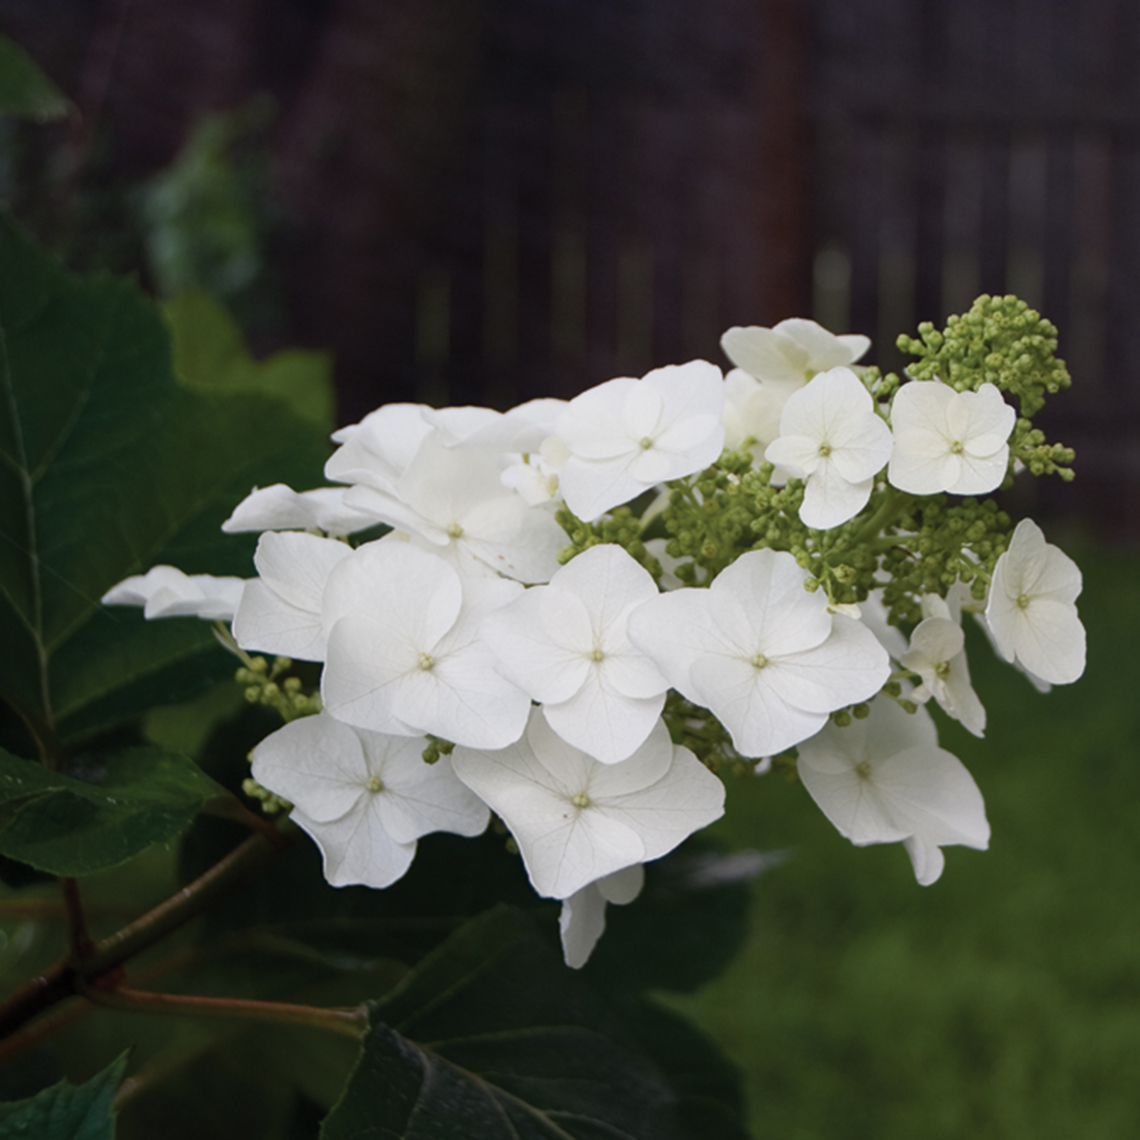 The white lacecap bloom of the regal oakleaf hydrangea